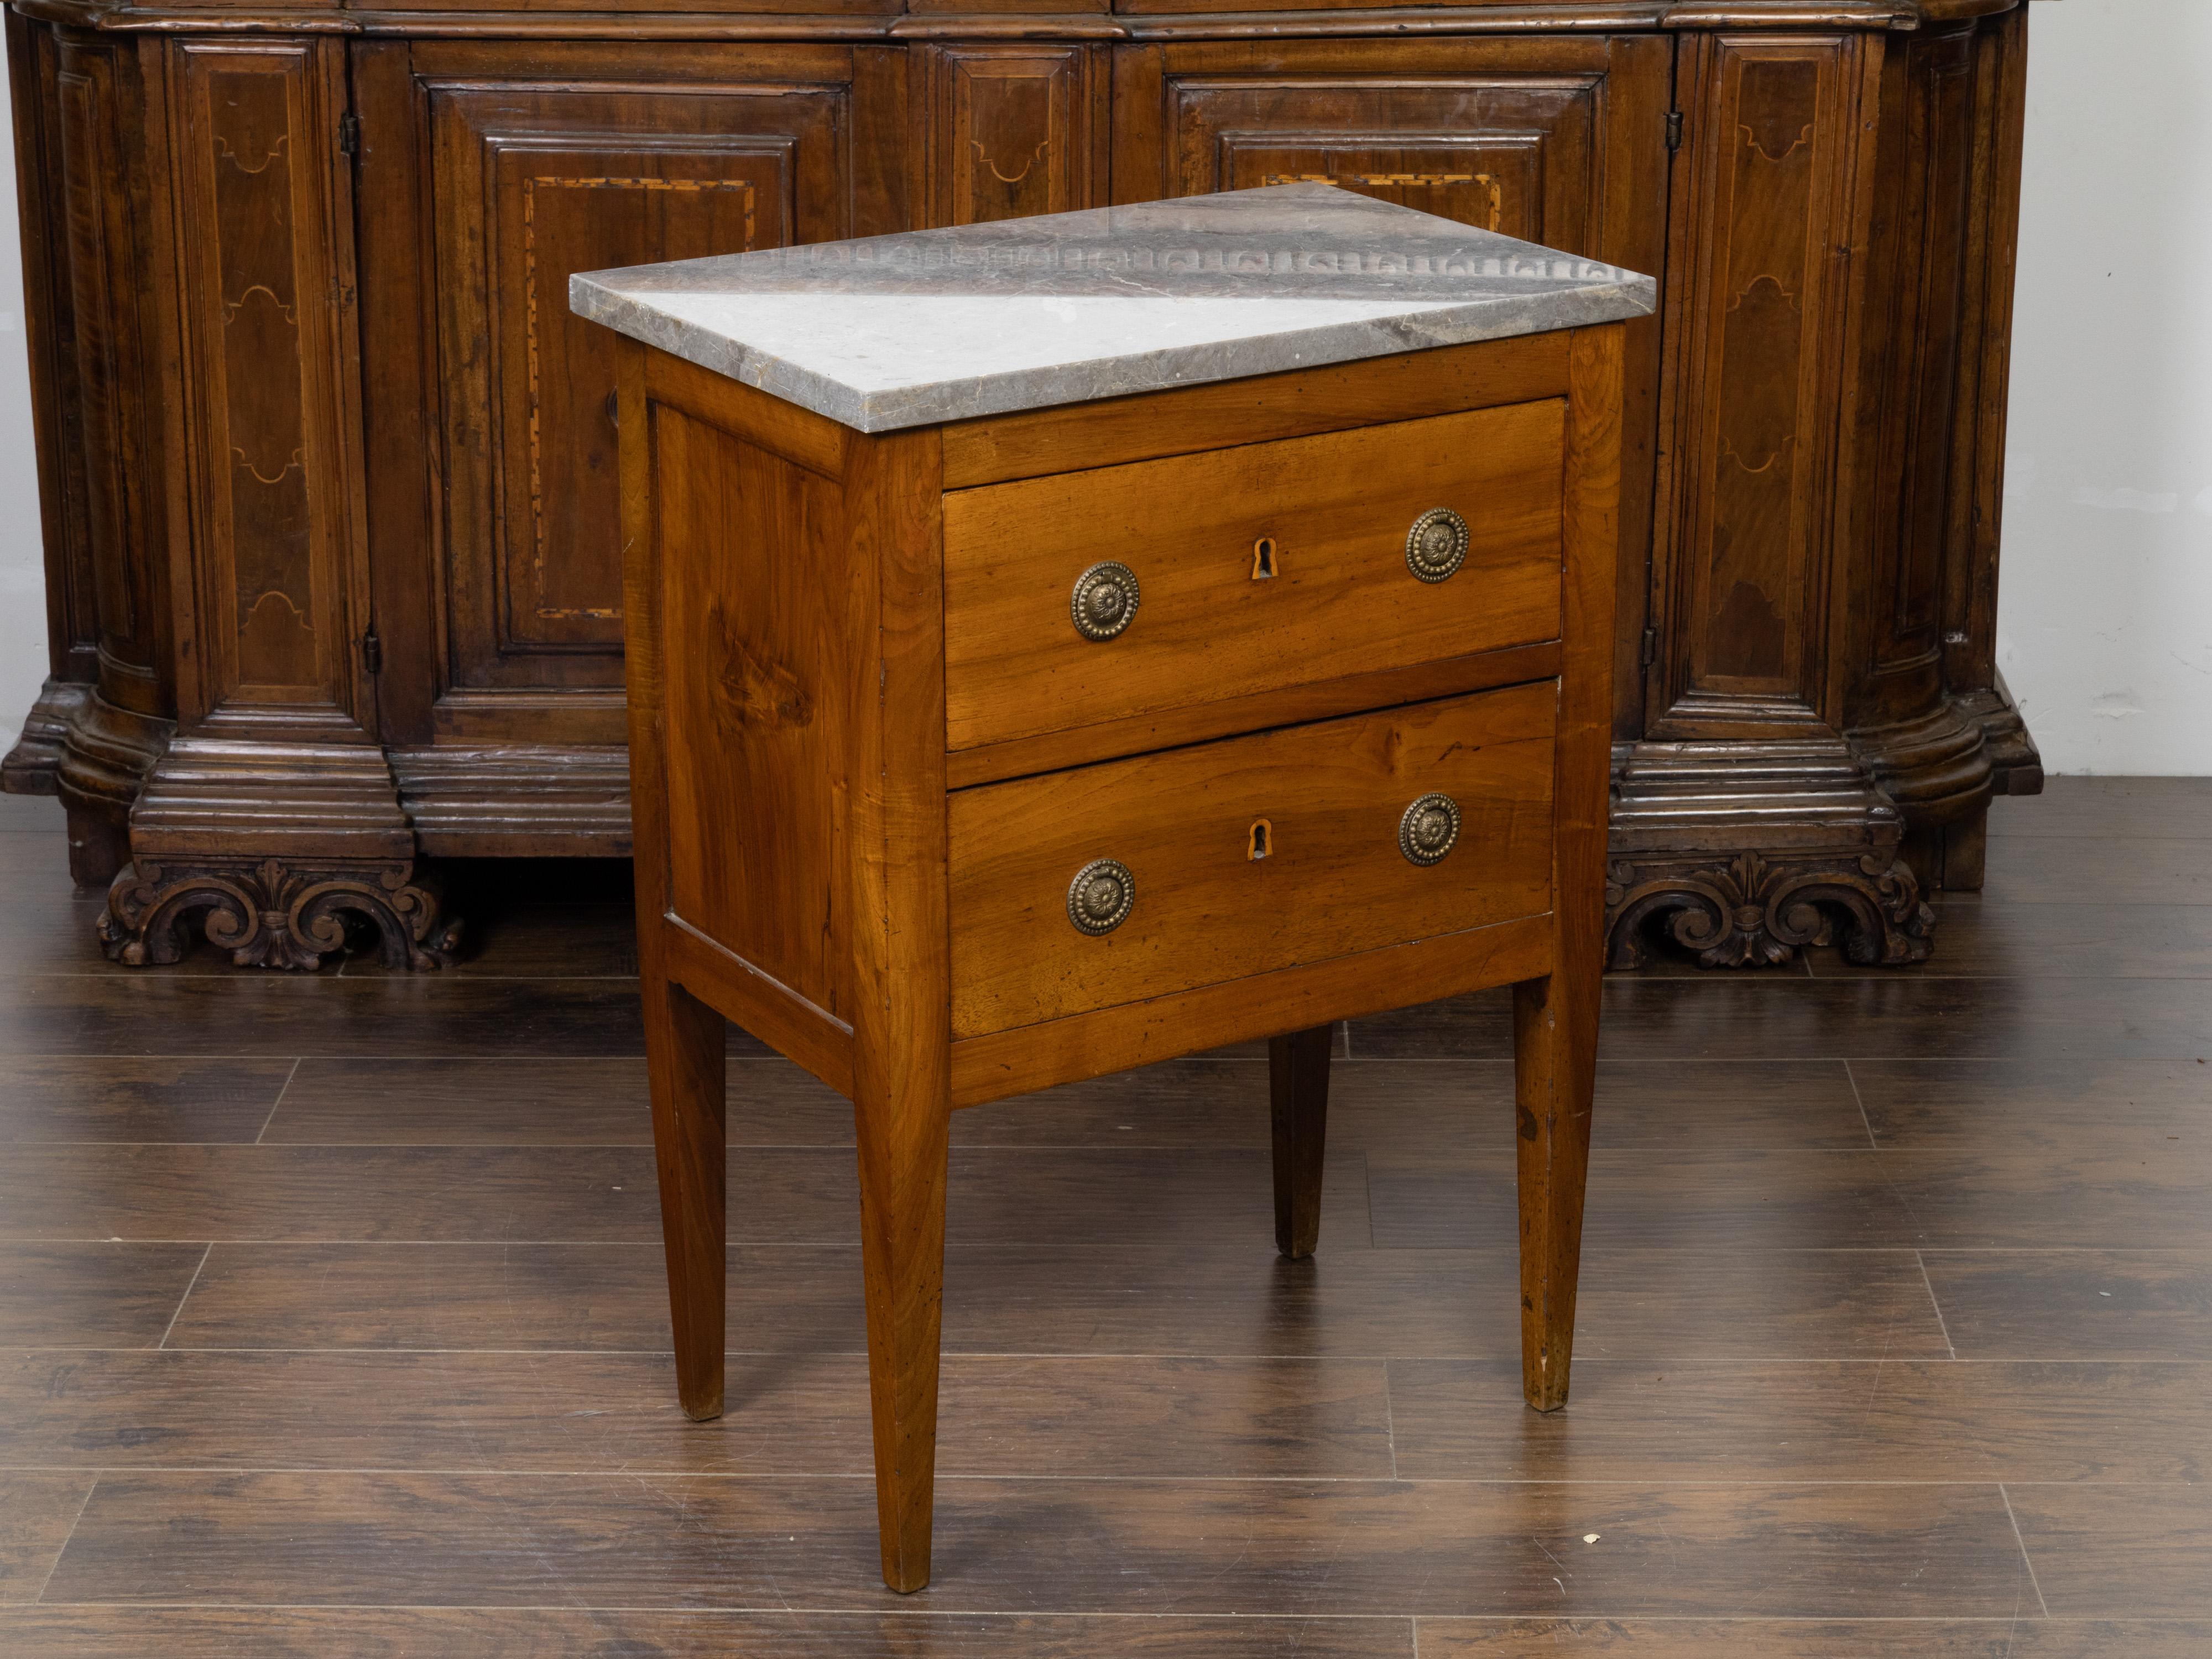 A petite French commode from the 19th century, with grey marble top and two drawers. Created in France during the 19th century, this petite commode features a rectangular grey marble top sitting above two drawers fitted with Classical hardware.